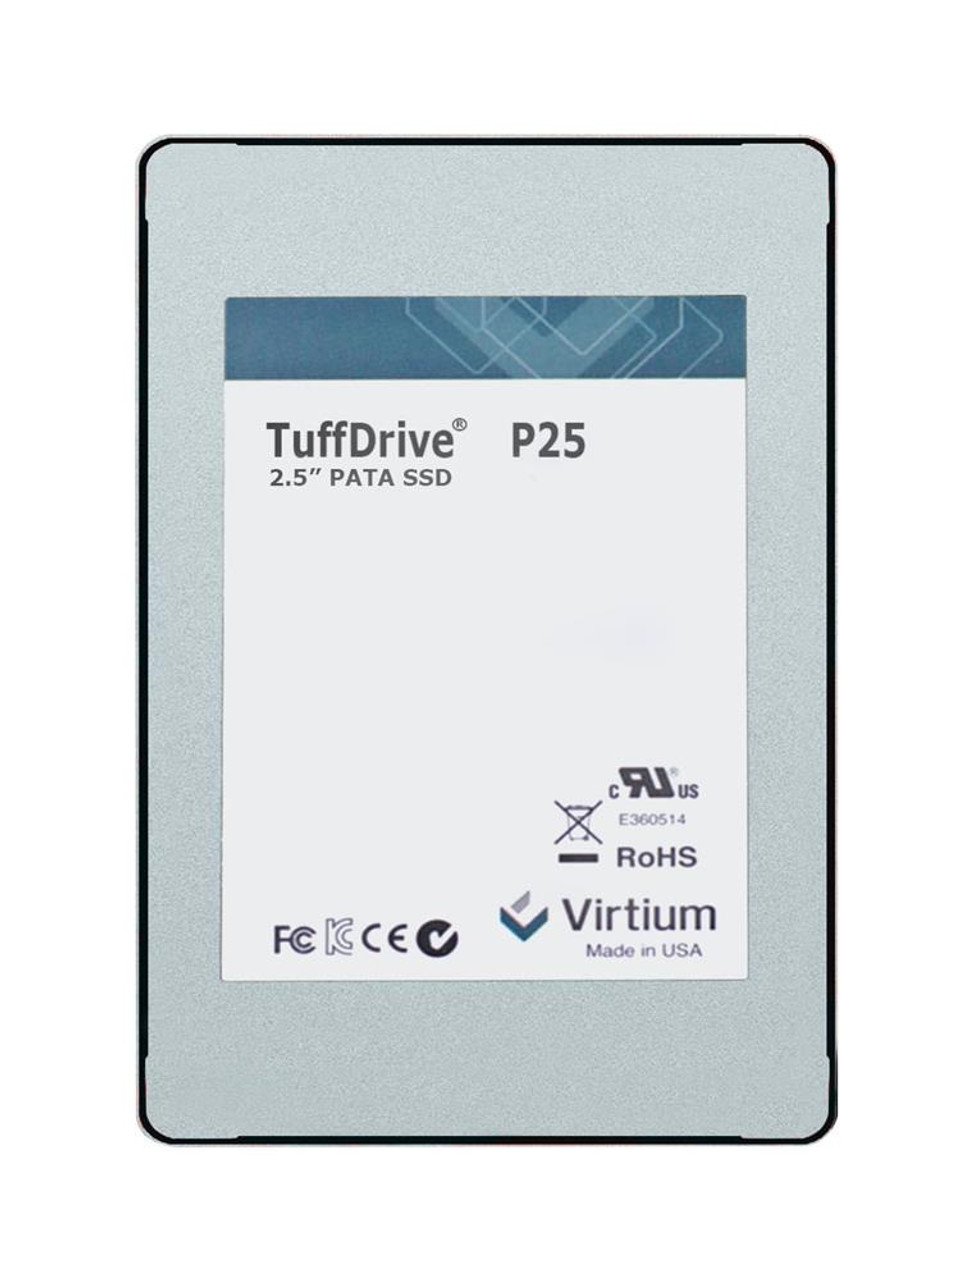 Virtium ATA / IDE Drives Solid State Drive